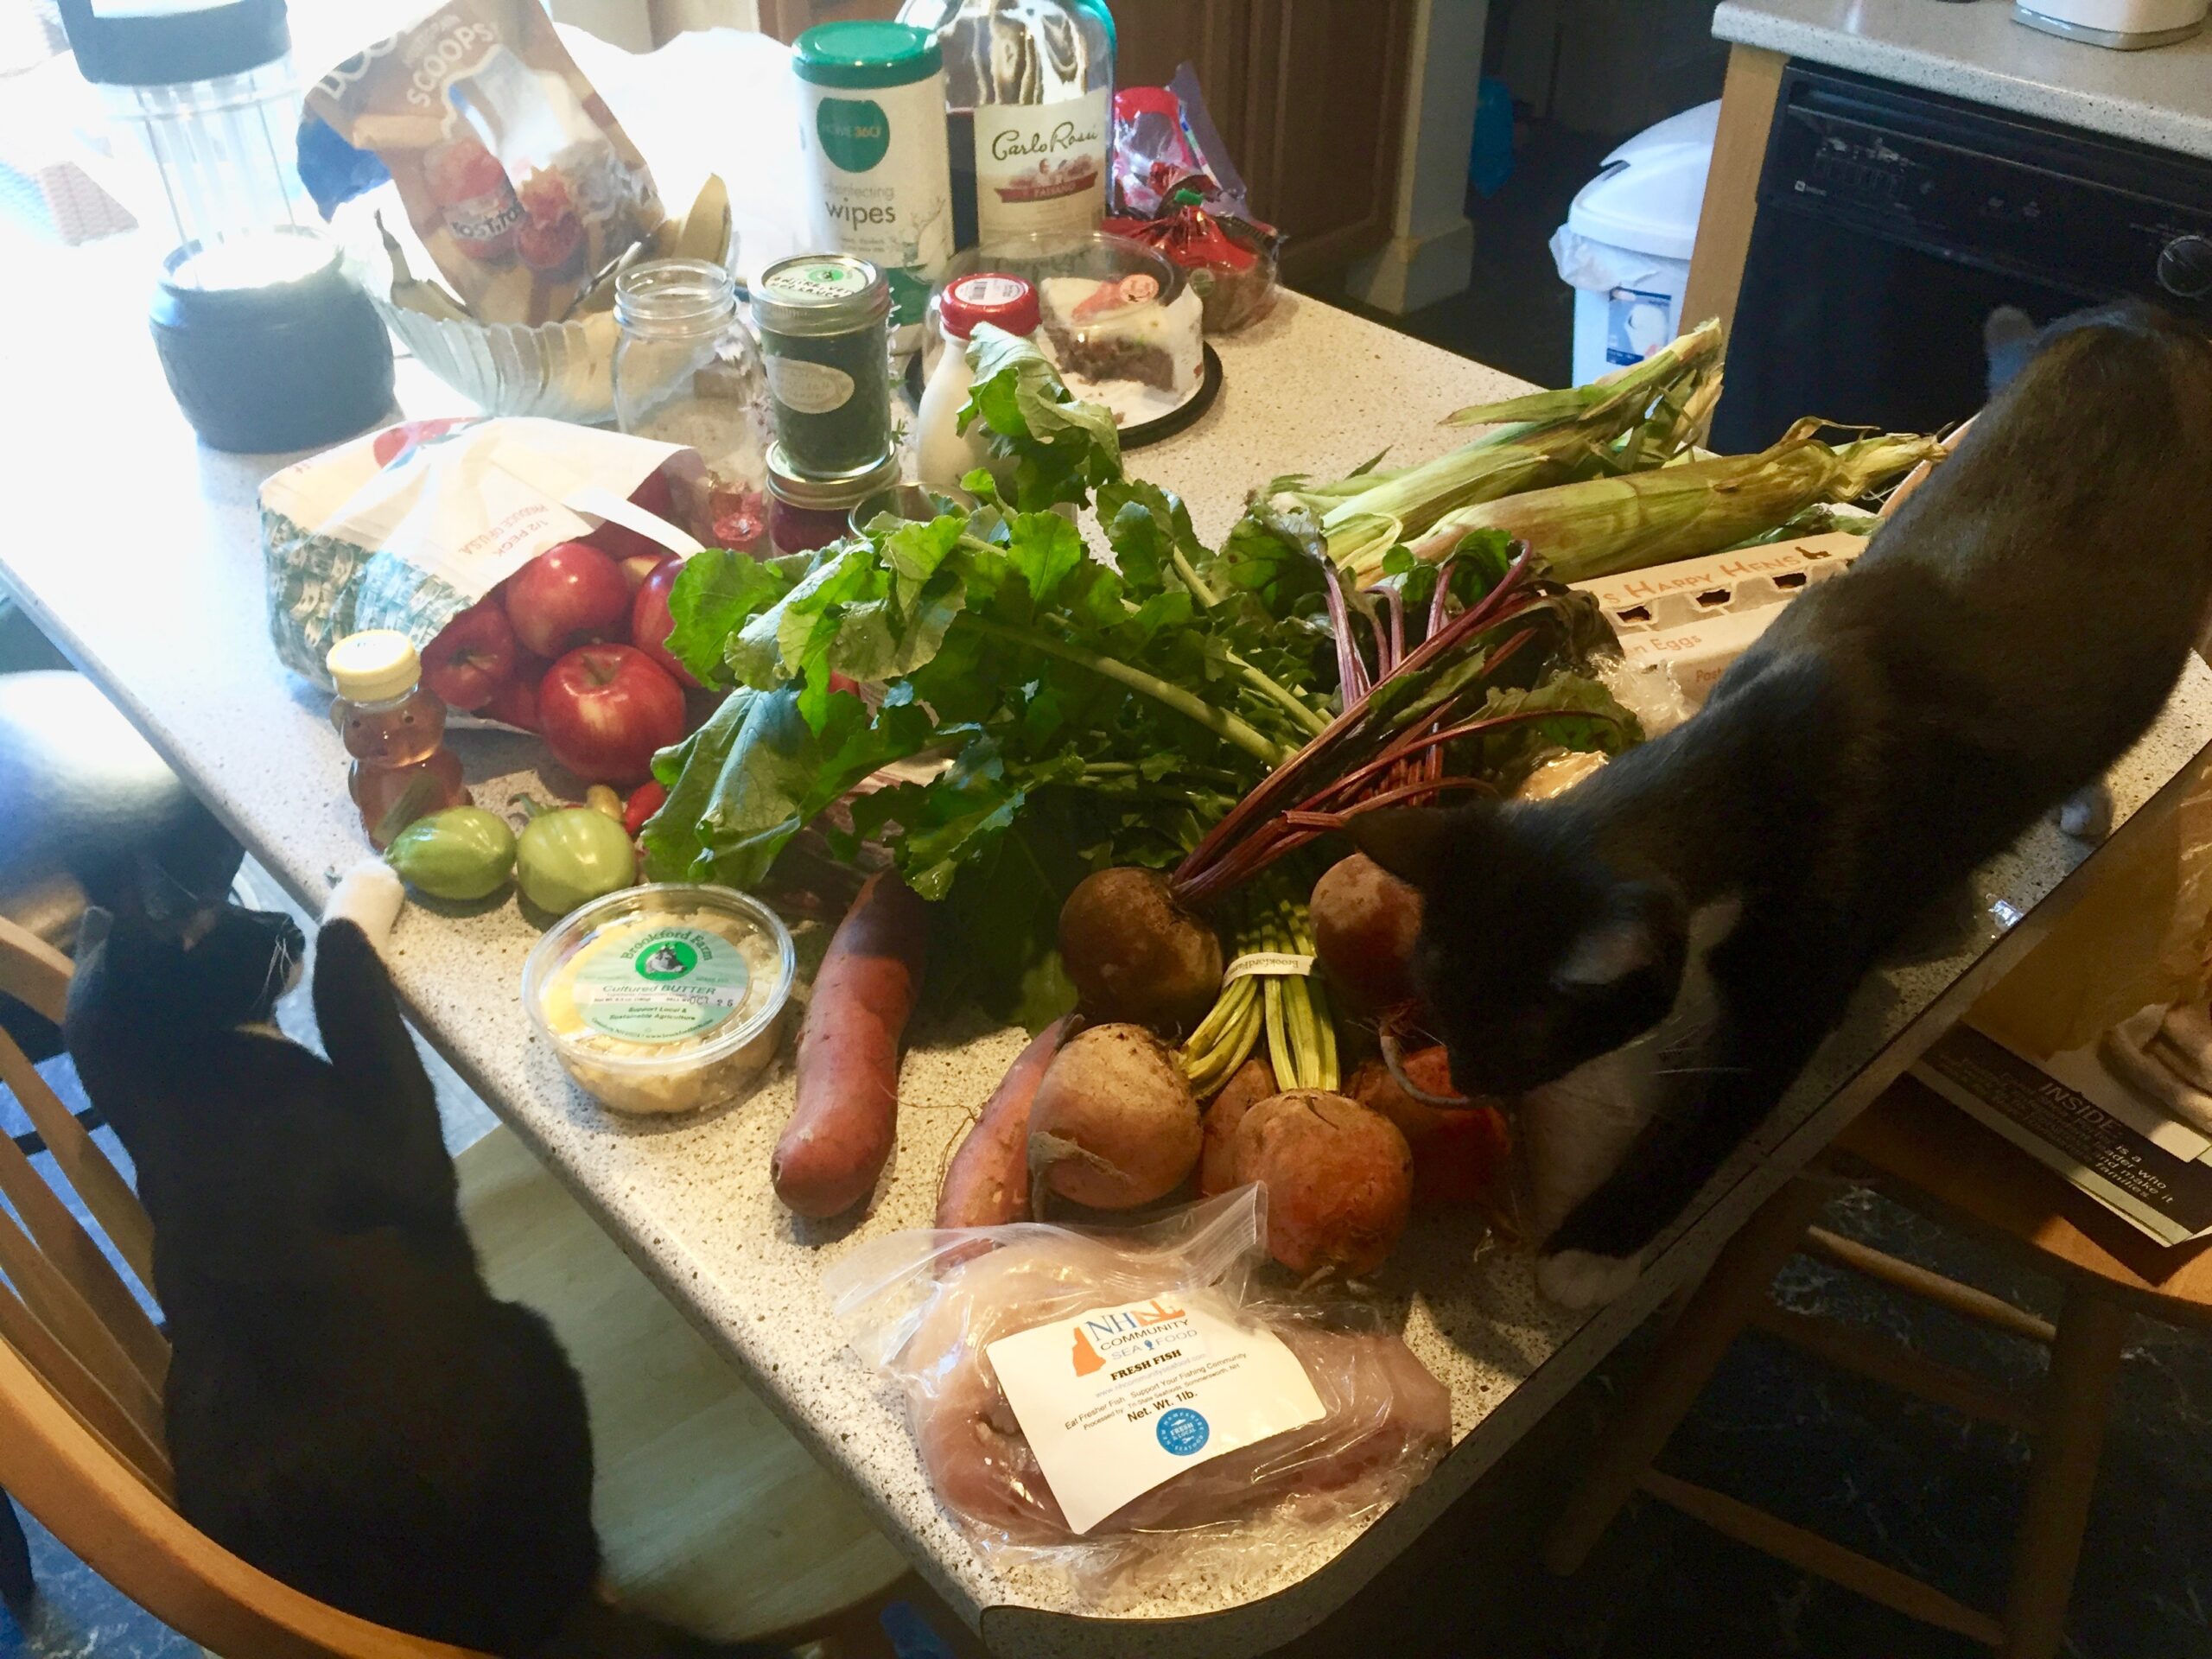 My haul: Luna checks out the vegetables while Bella bypasses the beets for the fresh pollock.